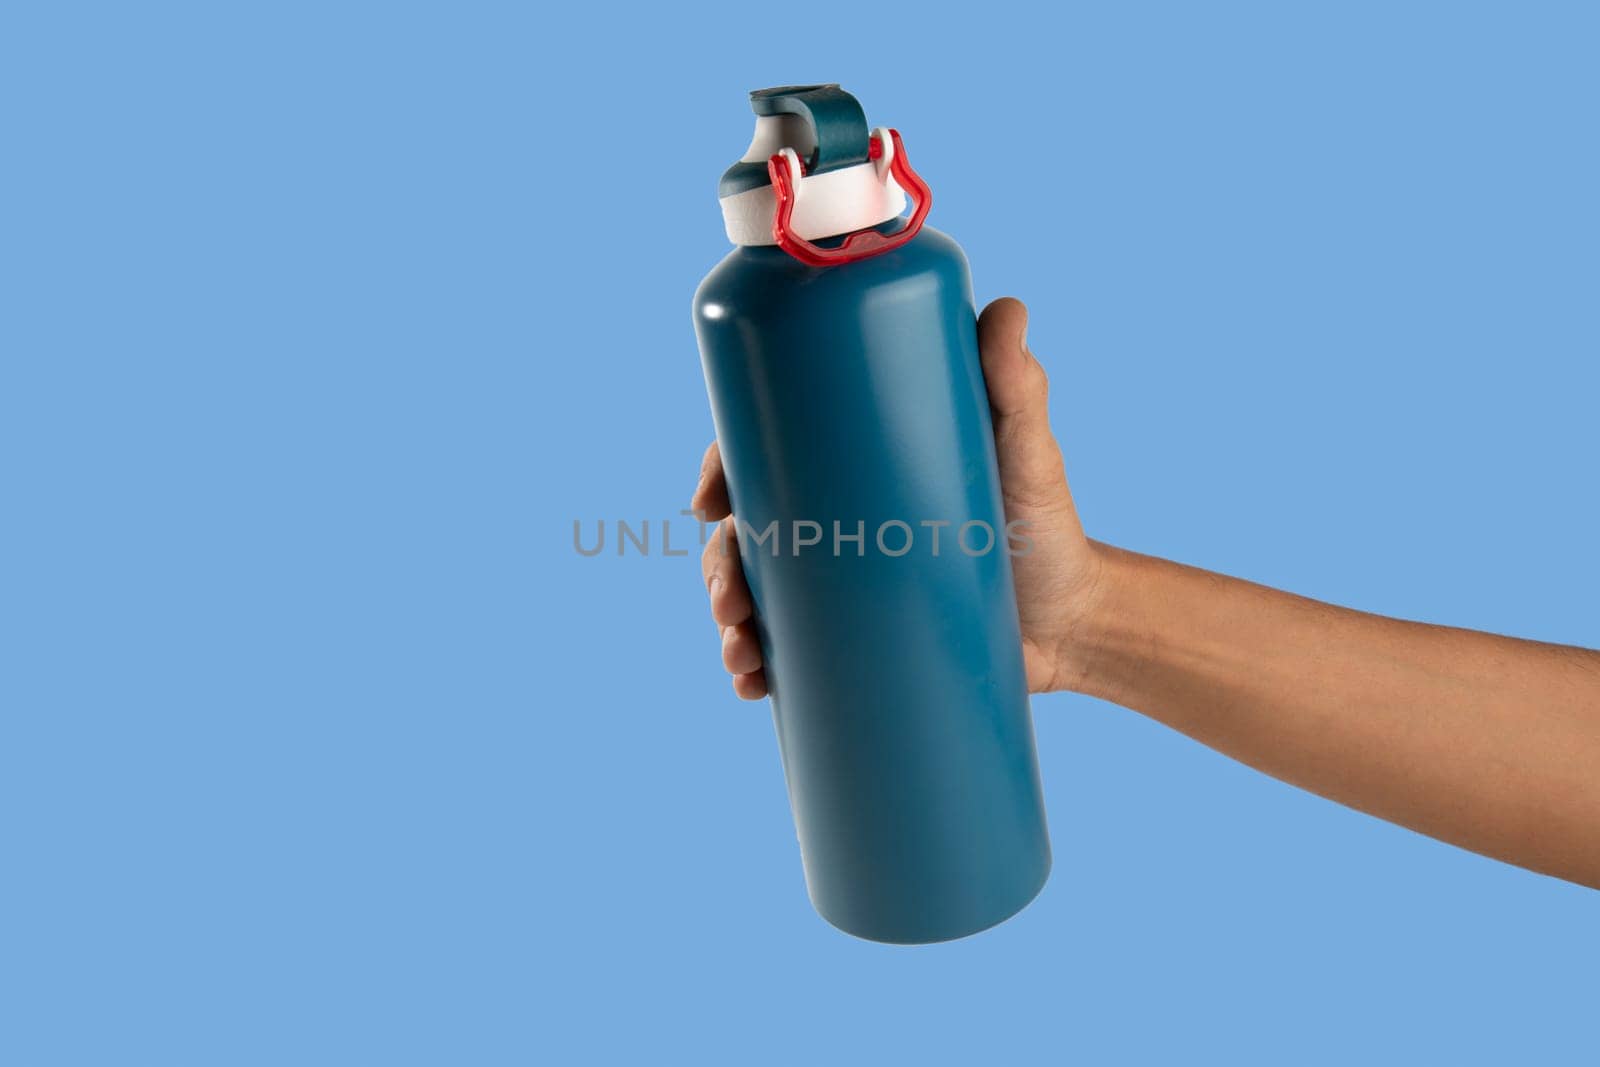 Black male holding thermo bottle canteen on light blue background by TropicalNinjaStudio